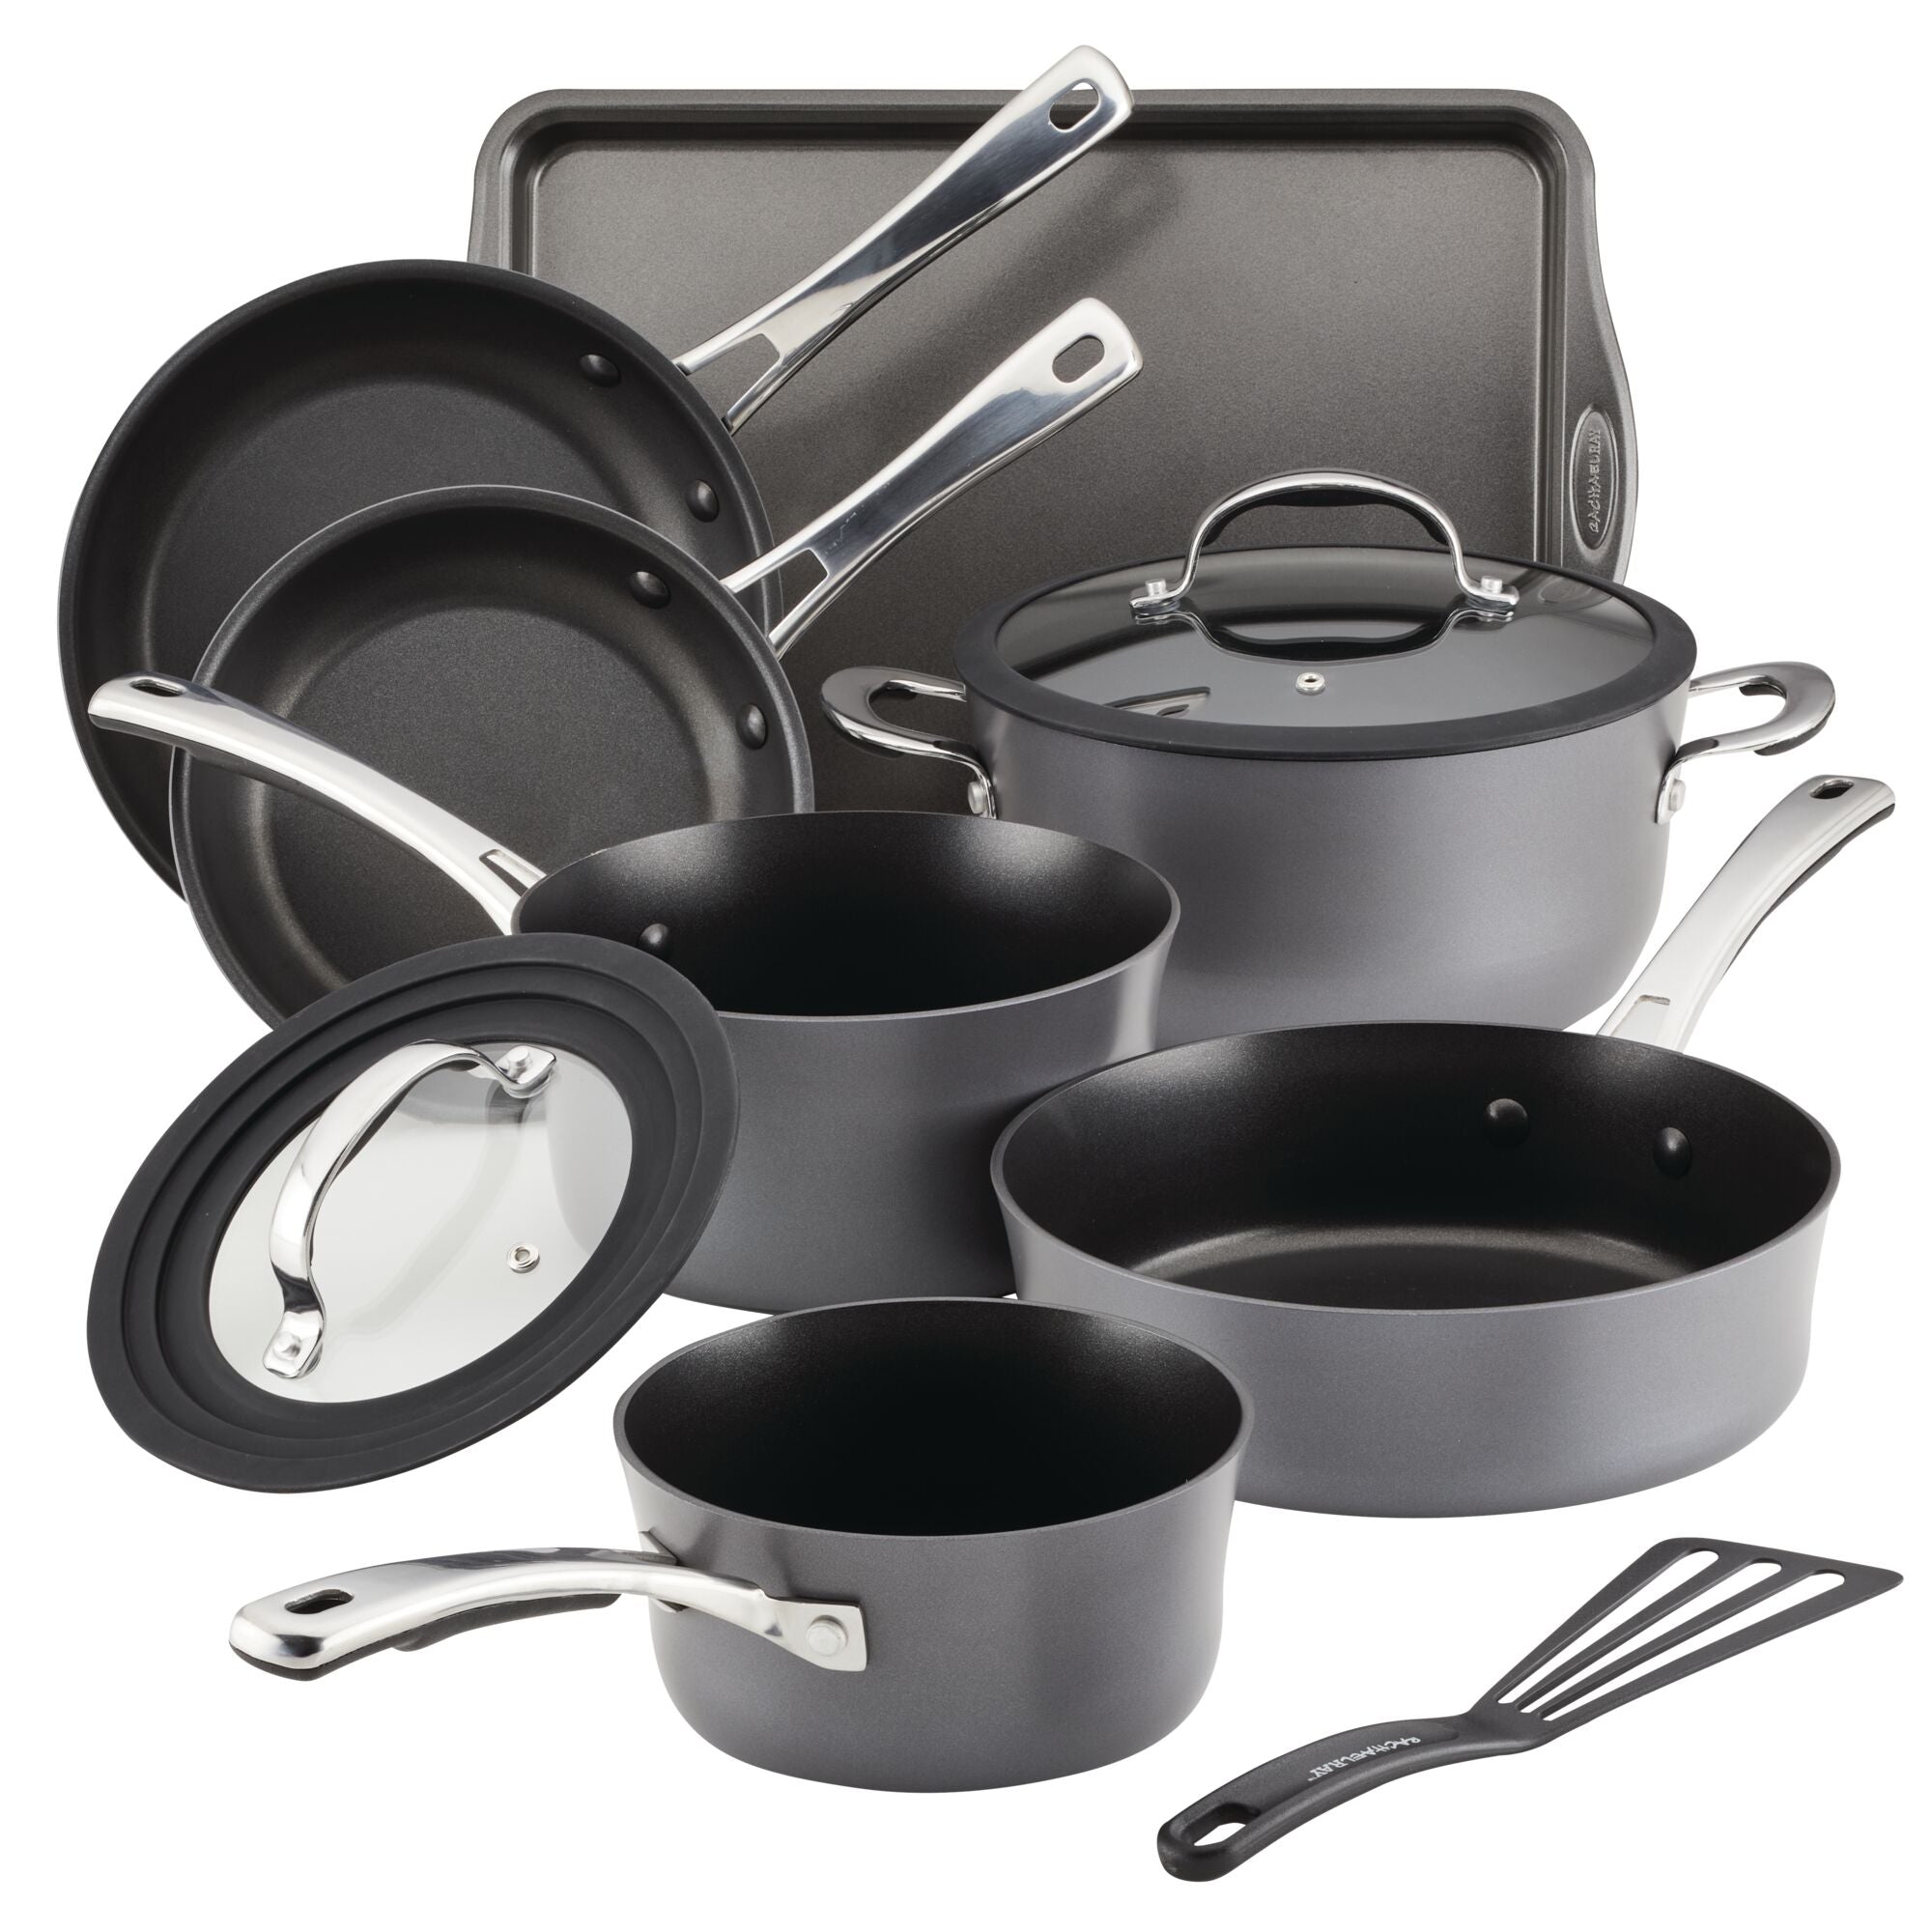 Hard Anodized Nonstick Cookware Sets